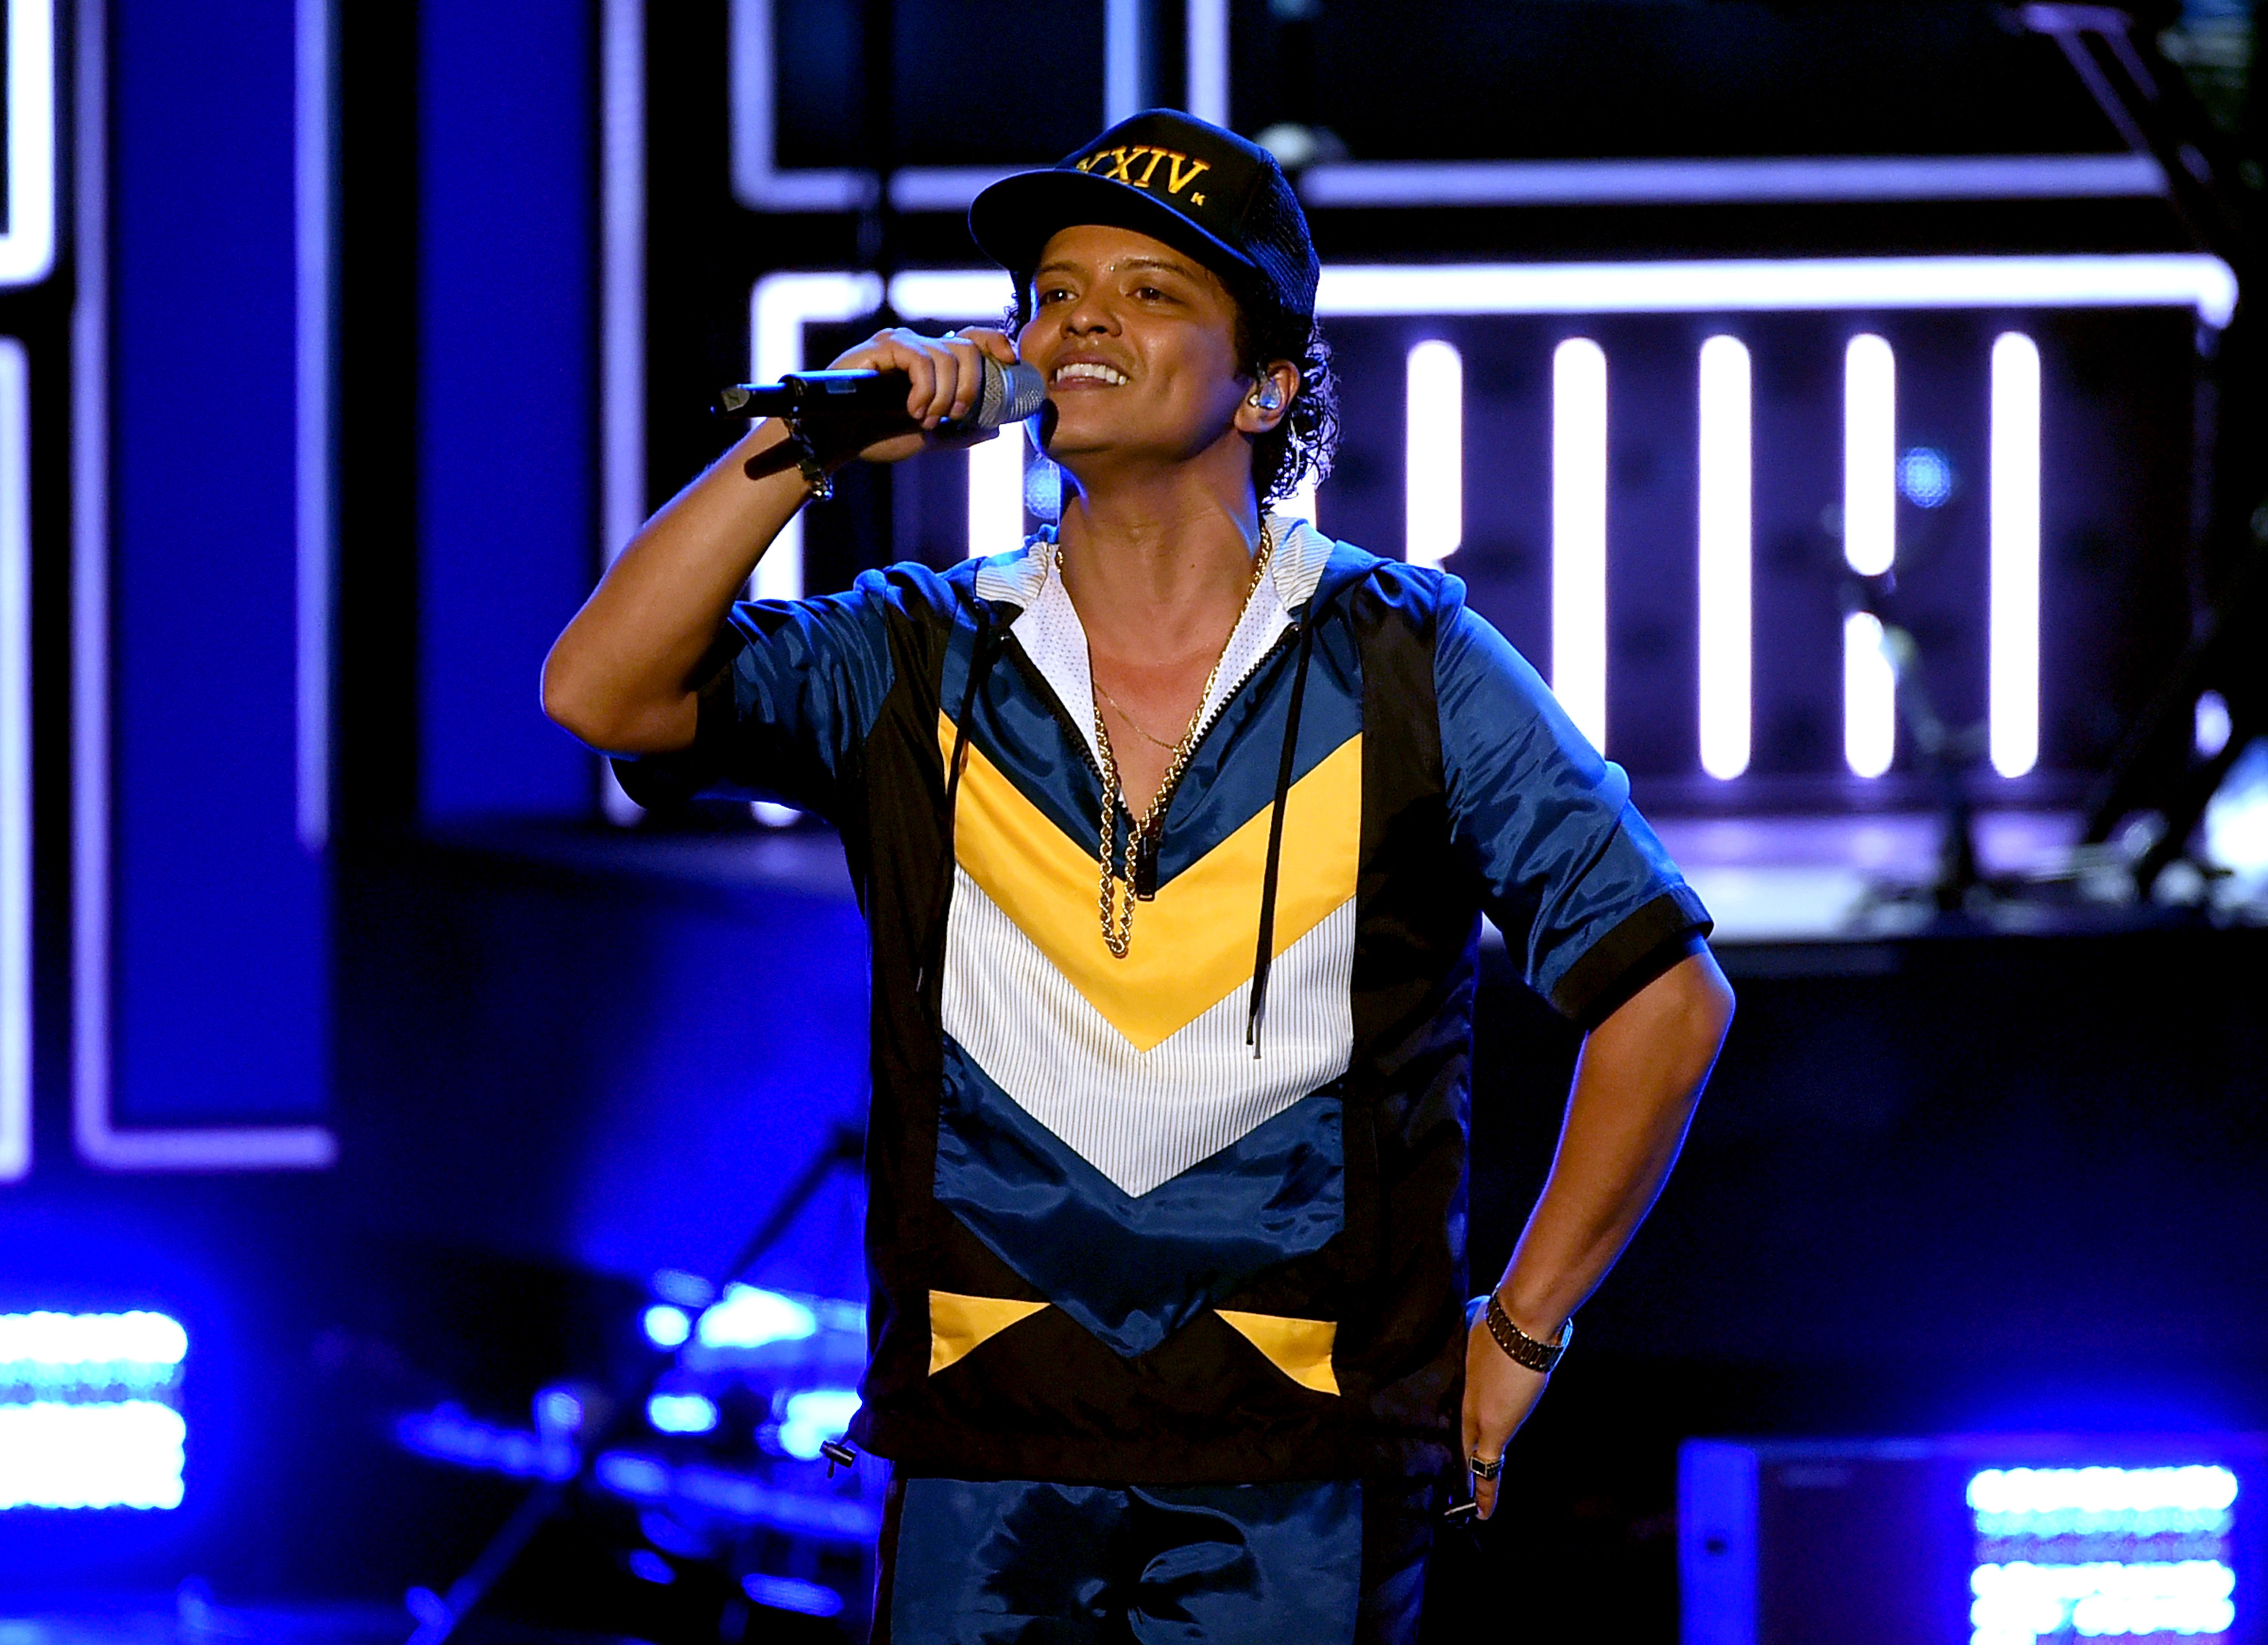 LOS ANGELES, CA - NOVEMBER 20: Singer Bruno Mars performs onstage during the 2016 American Music Awards at Microsoft Theater on November 20, 2016 in Los Angeles, California. Kevin Winter/Getty Images/AFP